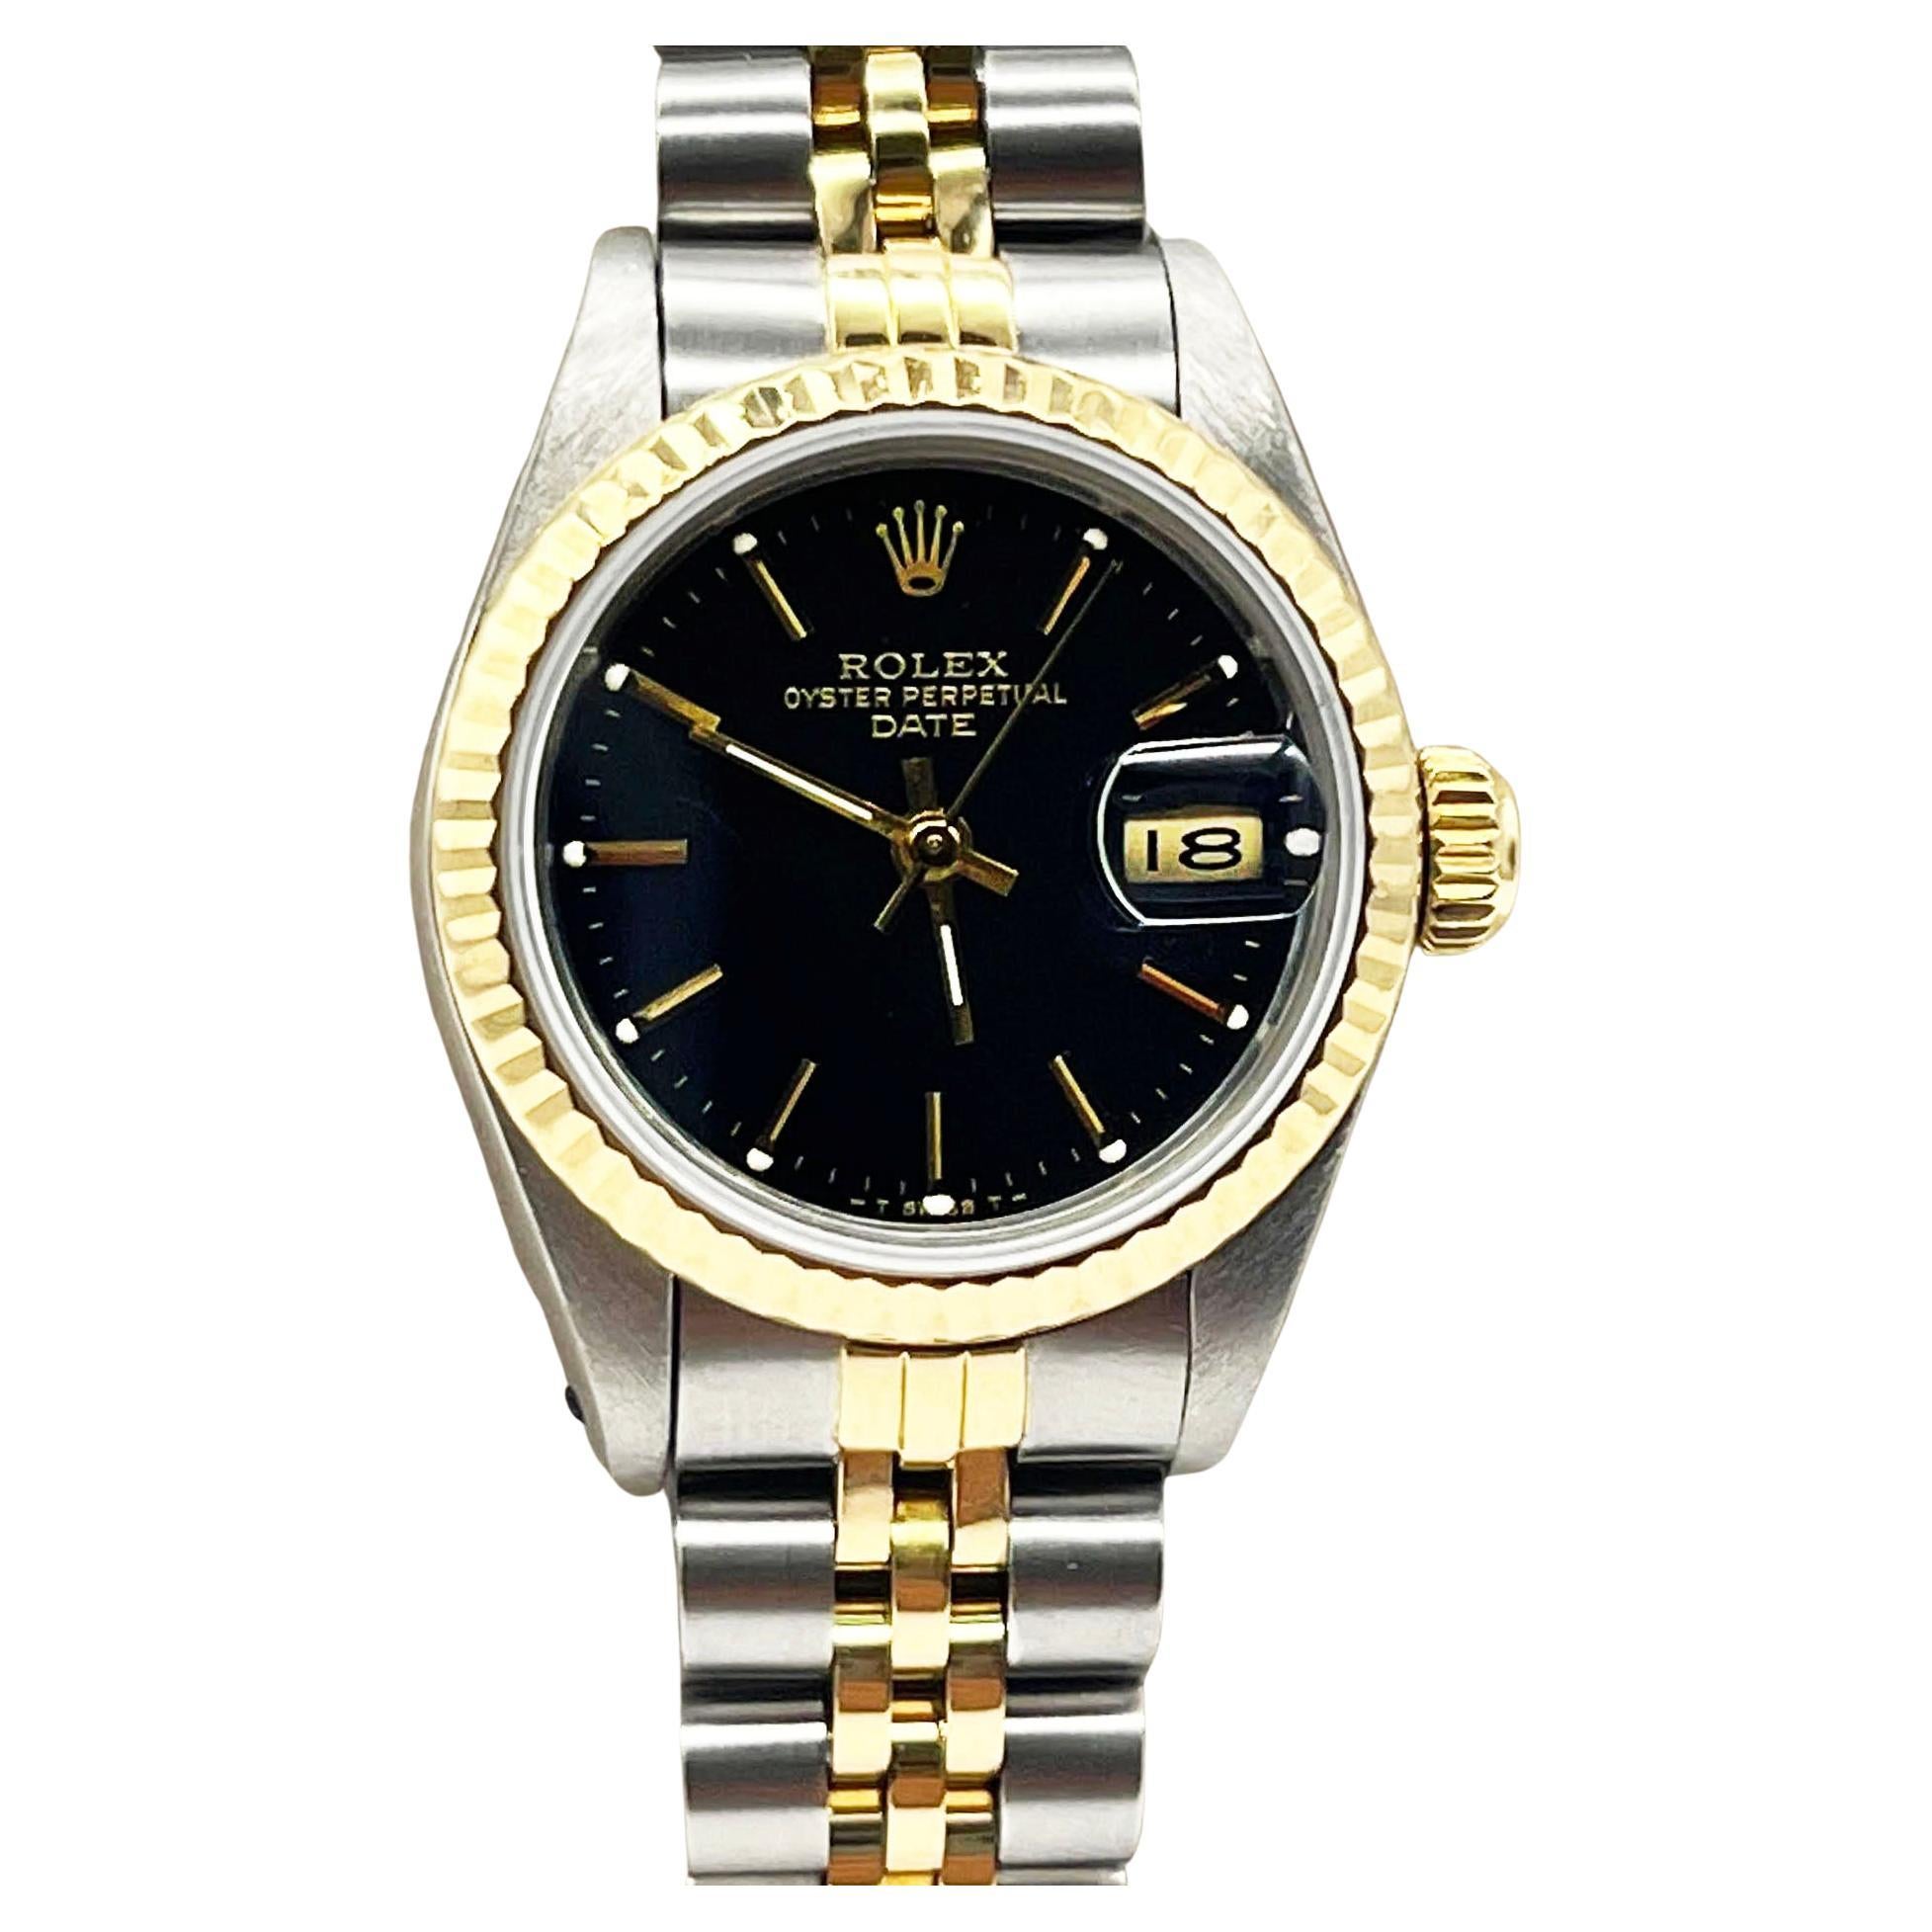 Style Number: 69173

Serial: R841***

Year: 1990

Model: Date

Case Material: Stainless Steel 

Band: 18K Yellow Gold & Stainless Steel 

Bezel: 18K Yellow Gold

Dial: Black

Face: Sapphire Crystal 

Case Size: 26mm 

Includes: 

-Rolex Box &